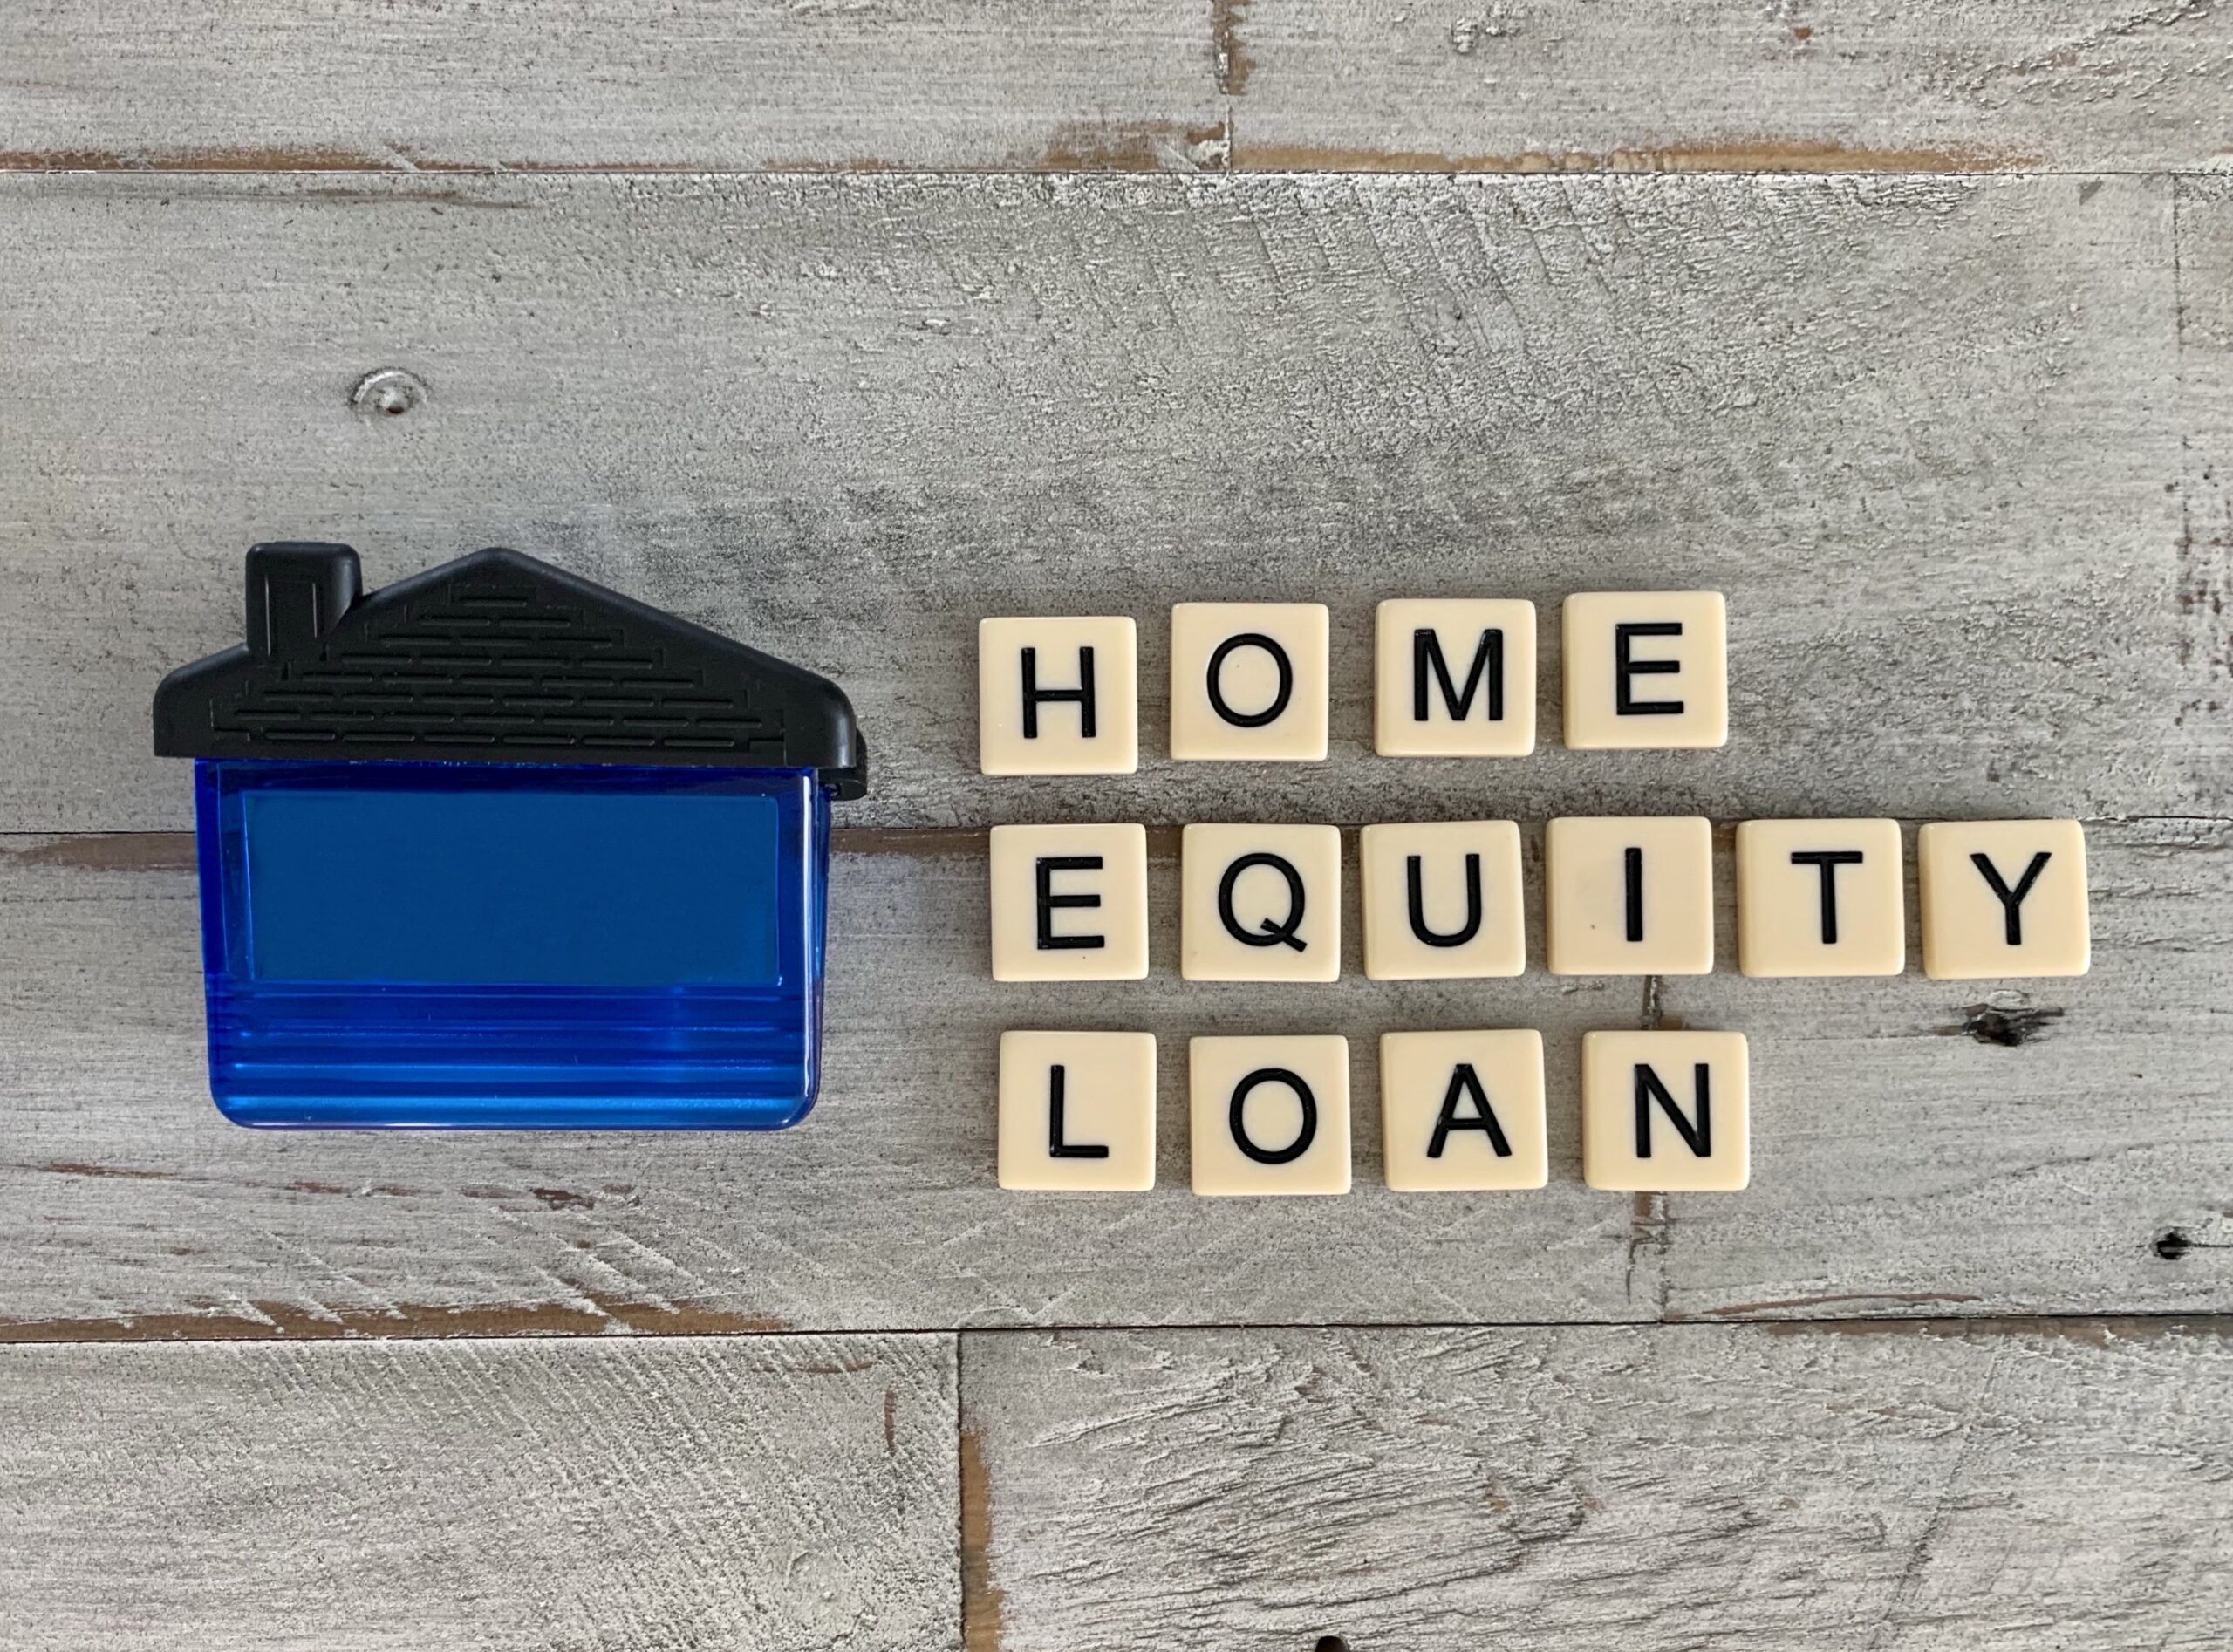 Advantages and disadvantages of a home equity loan